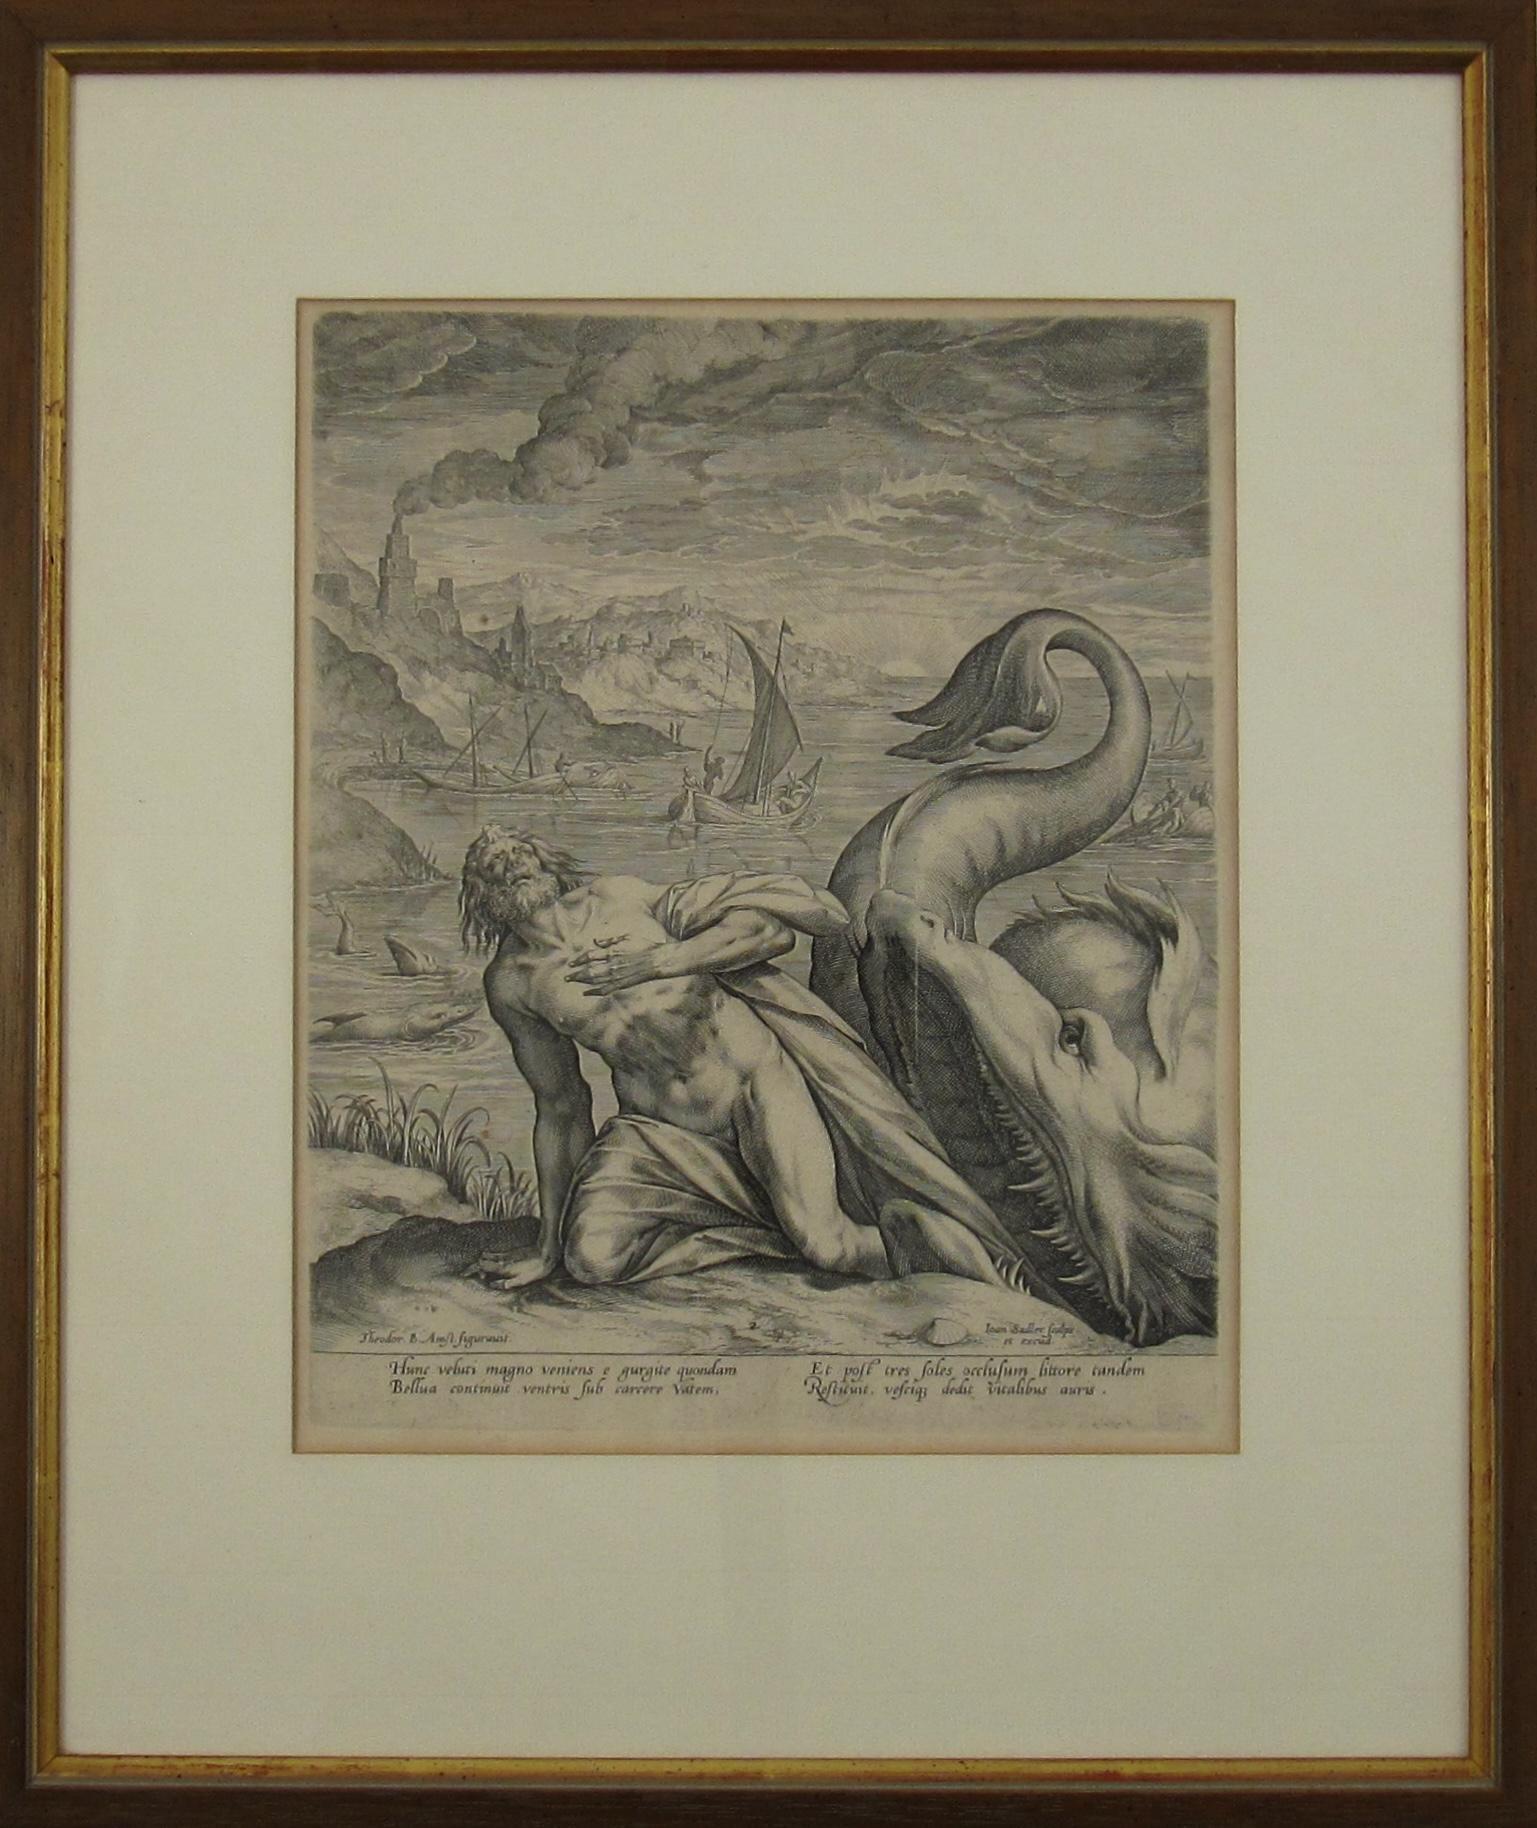 Johannes Sadeler I
(Flemish, ∗ 1550 in Brussels, Belgium – † 1600 Venice, Italy)

Jonah Spat Up by the Whale (Sheet II)

Engraved by Sadeler after an image created by Theodor Bernard aka Dirck Barendsz (Dutch, Born 1534 and died 1592 in